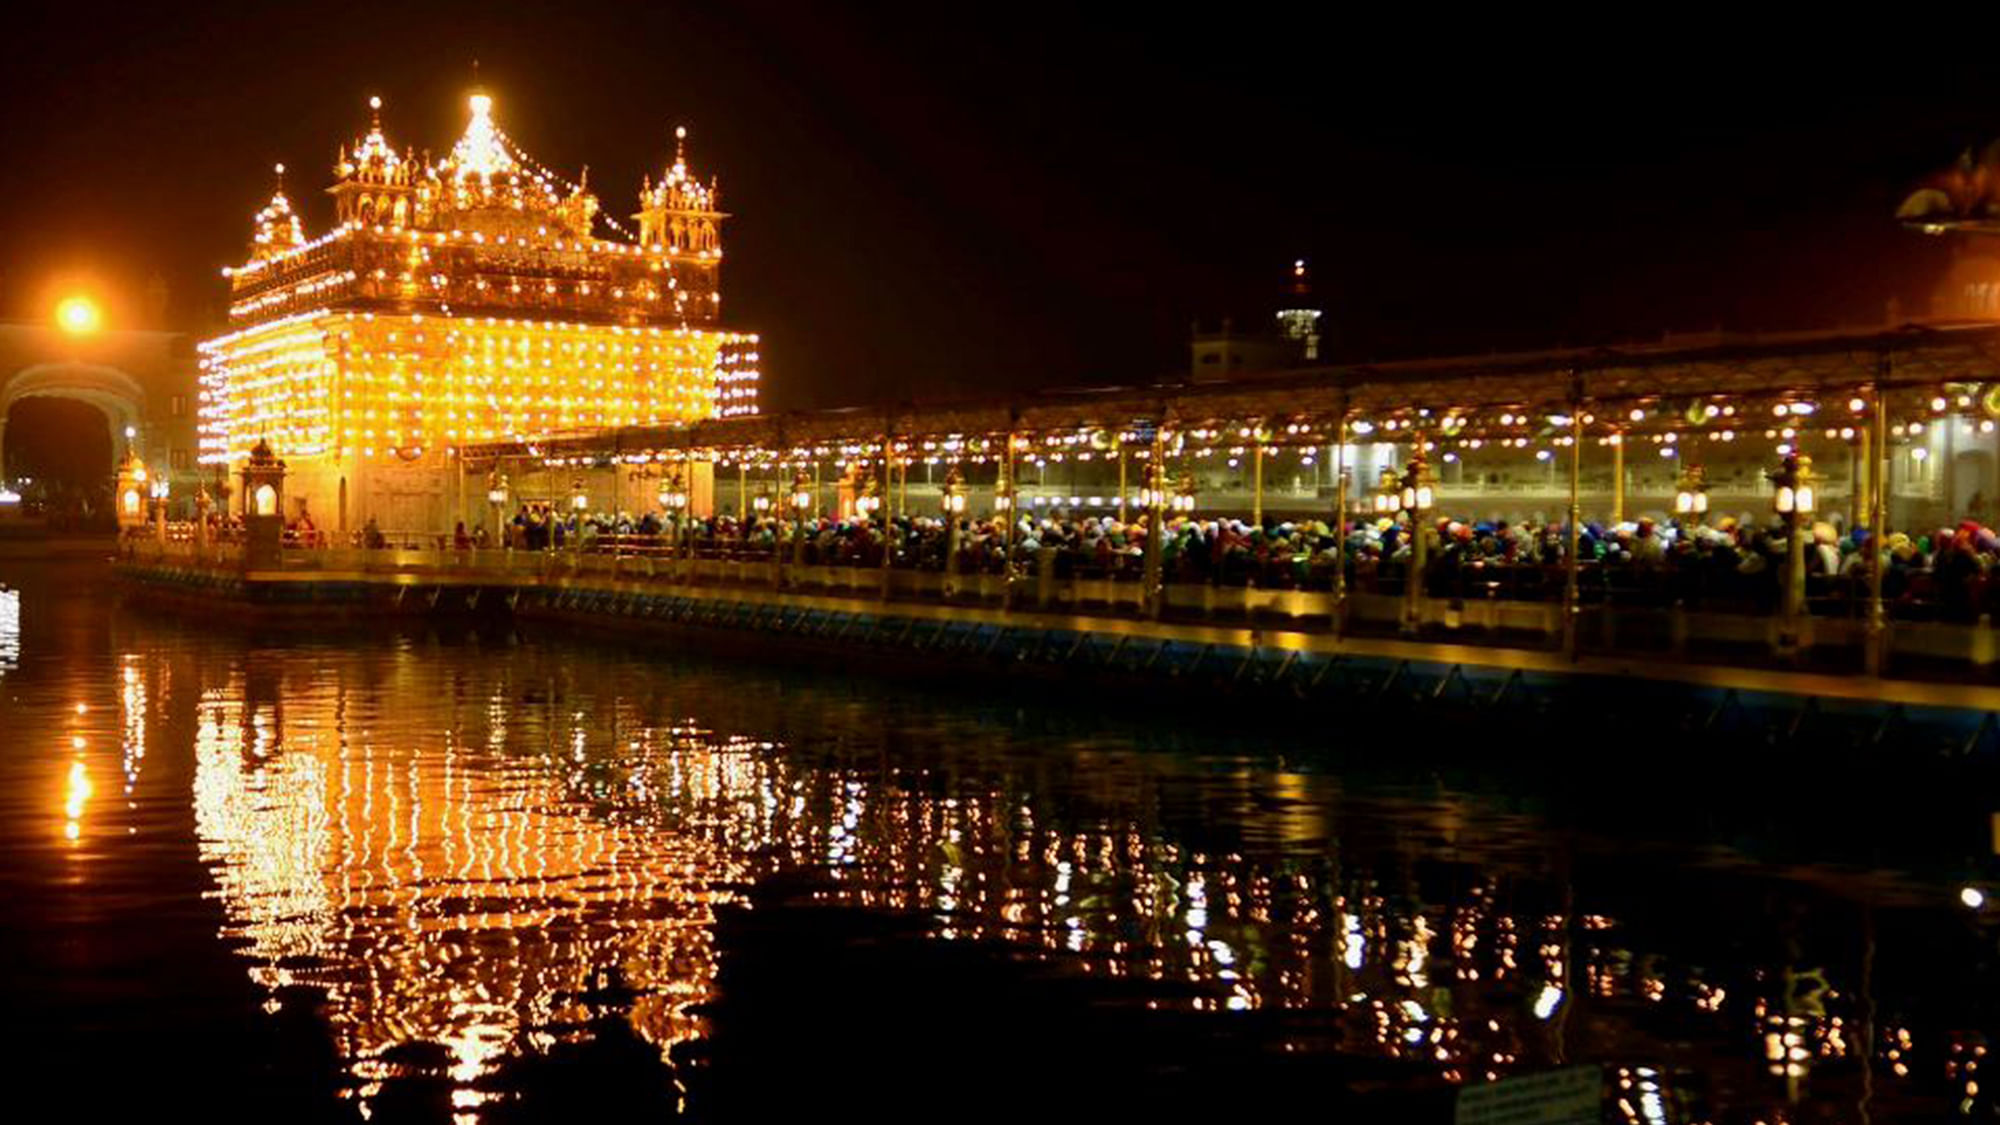 The Golden Temple wears a festive look on the eve of Gurpurab. (Photo Courtesy: <a href="https://twitter.com/MajorPoonia">@majorpunia</a>)